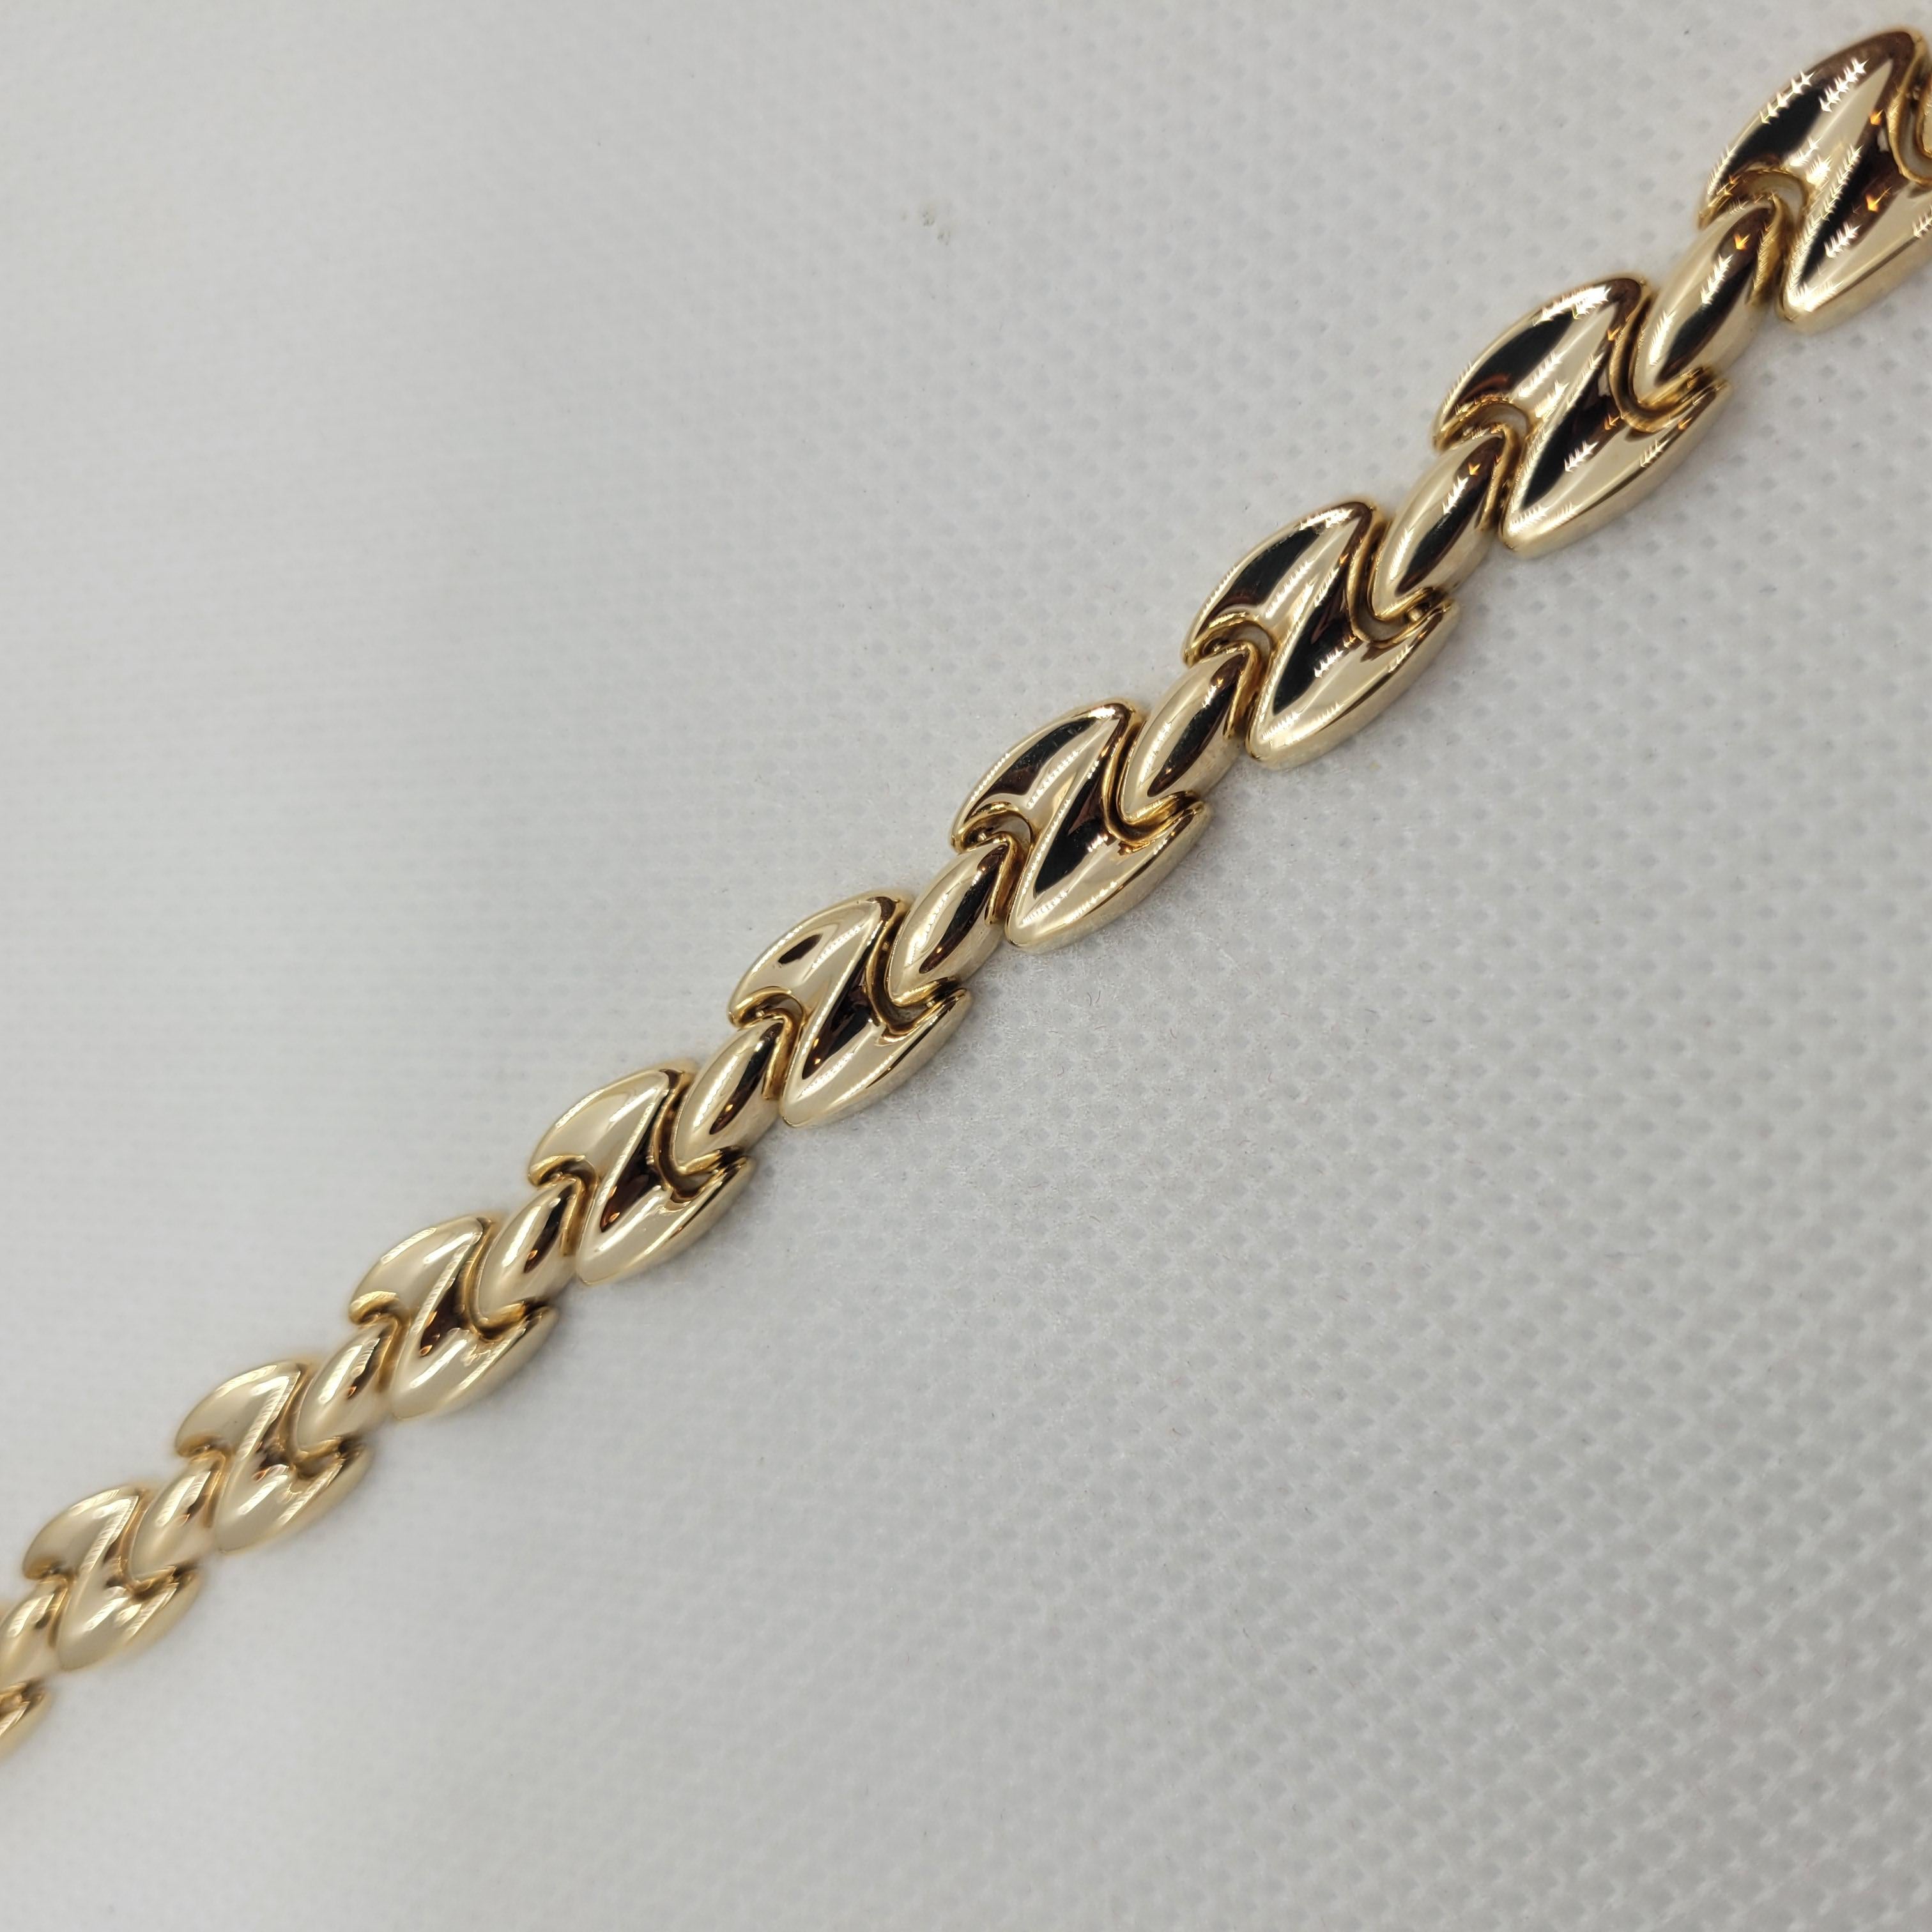 14kt Yellow Gold 7 Inch Link Bracelet, Italian, Hollow, 8mm Wide, 13.2 Grams In Good Condition For Sale In Rancho Santa Fe, CA